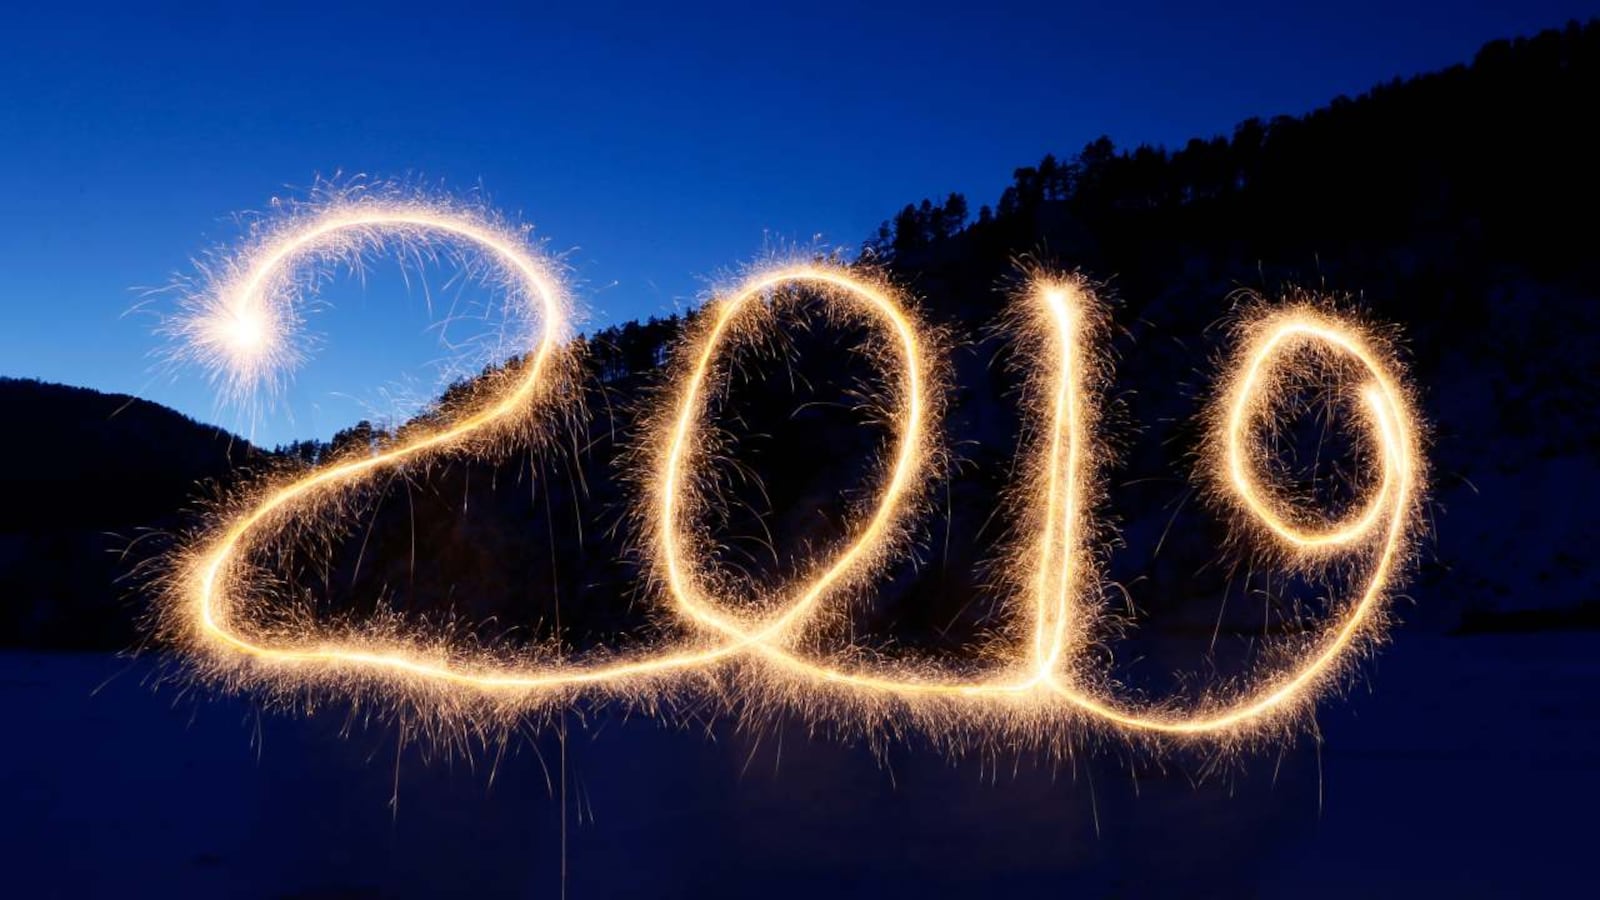 The countdown begins! Here is how the world is celebrating New Years 2019